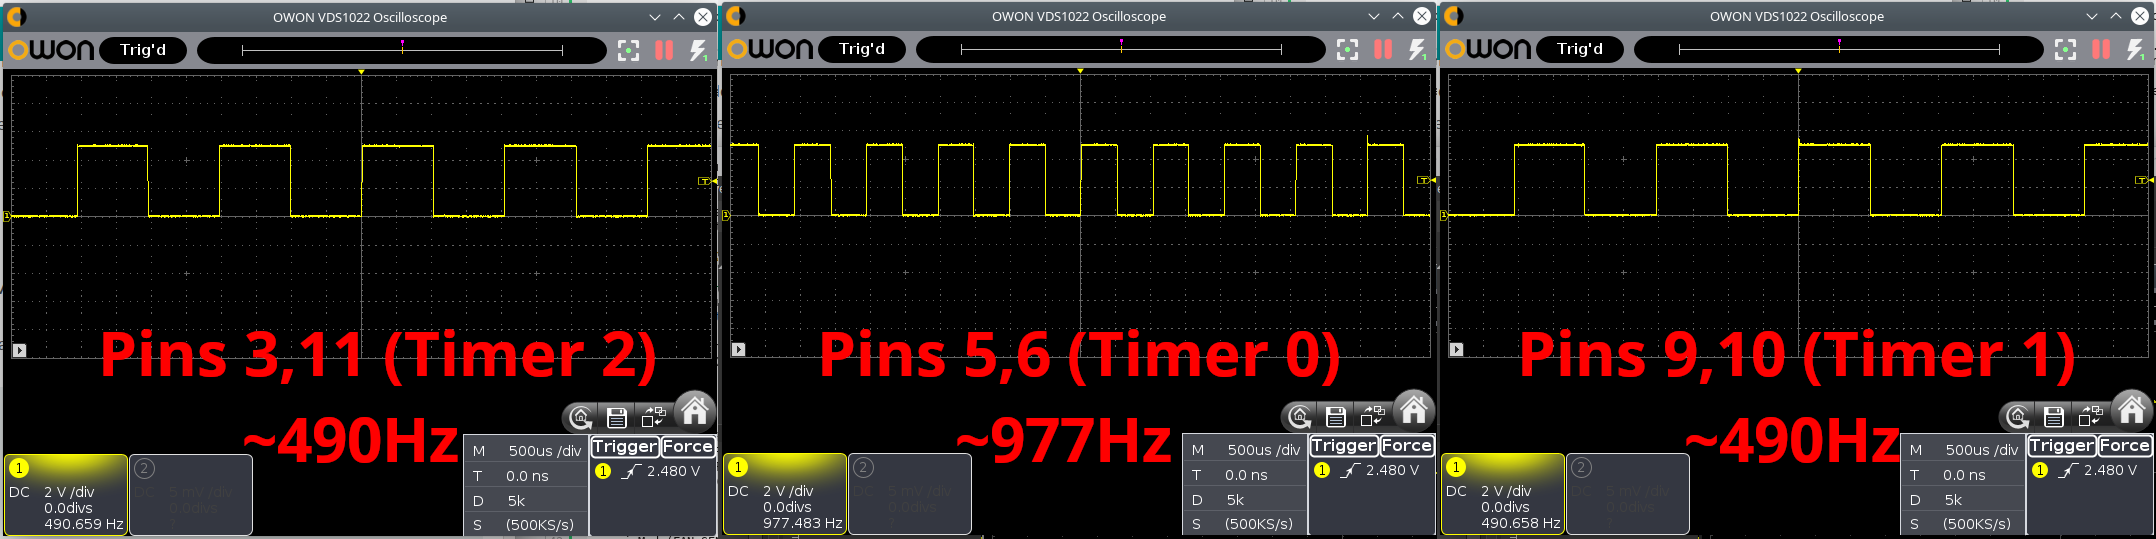 Oscilloscope outputs of the various pins showing 50% PWM with default settings